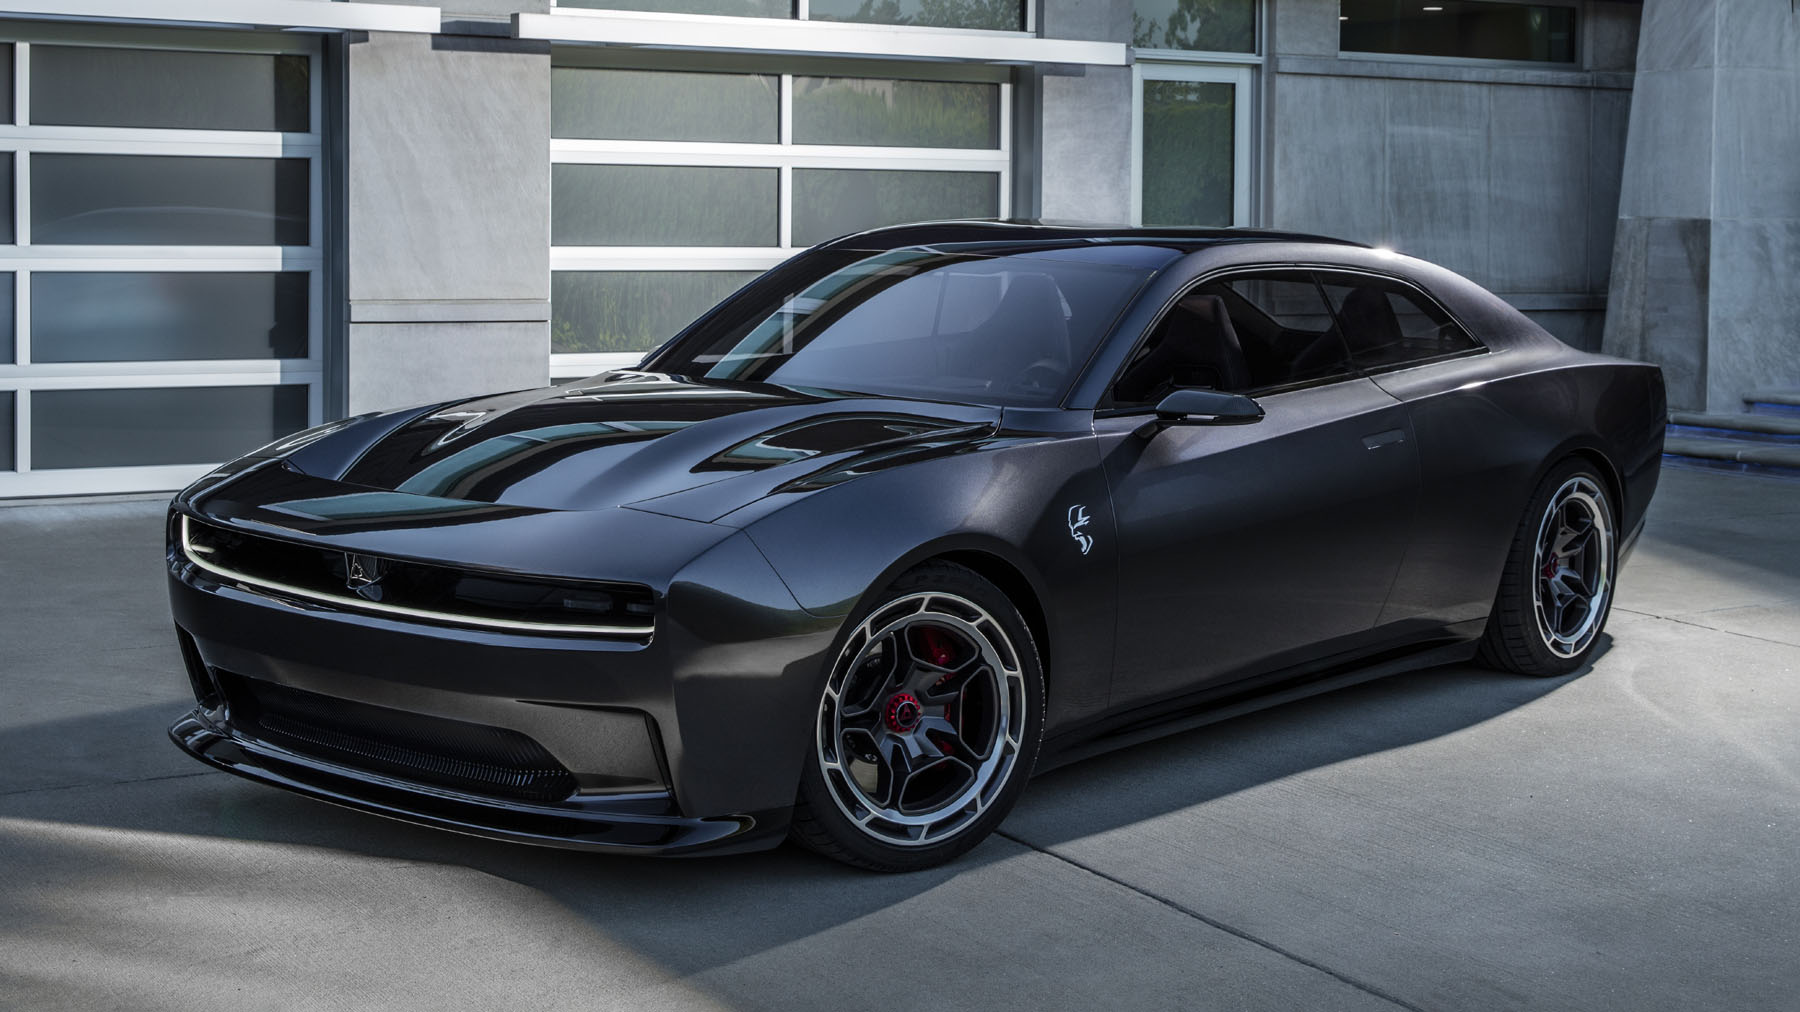 Dodge Targets Political Sensibilities in Awkward Charger EV Commercial